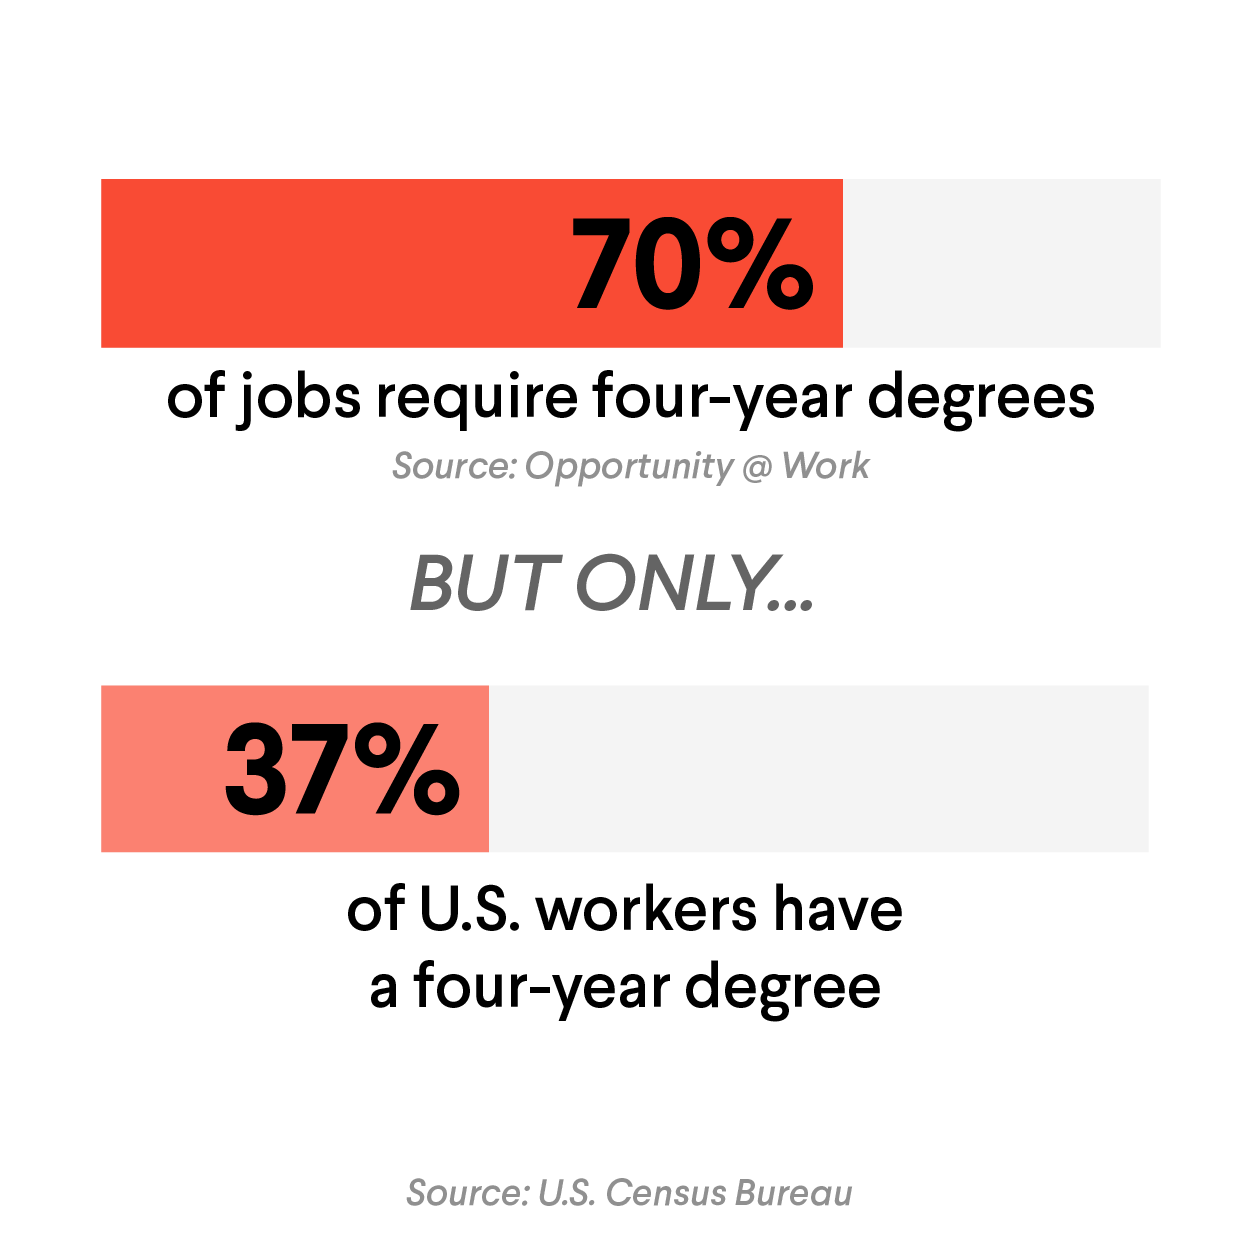 70% of jobs require four-year degrees but only 37% of U.S. workers have a four-year degree.